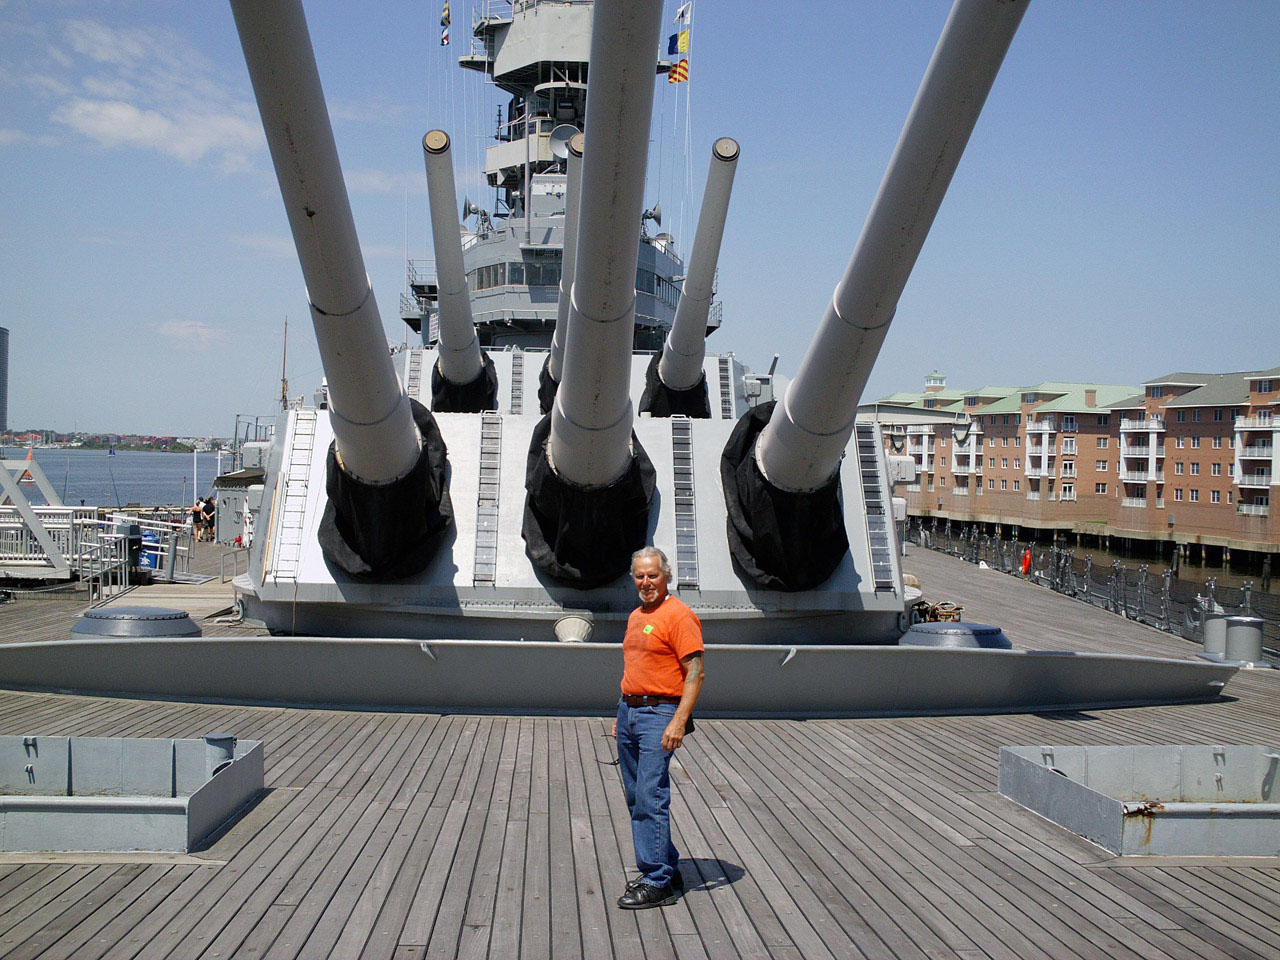 Trip to Virginia. Toured the Battleship Wisconsin. Photo coutesy Victor Lefebrve